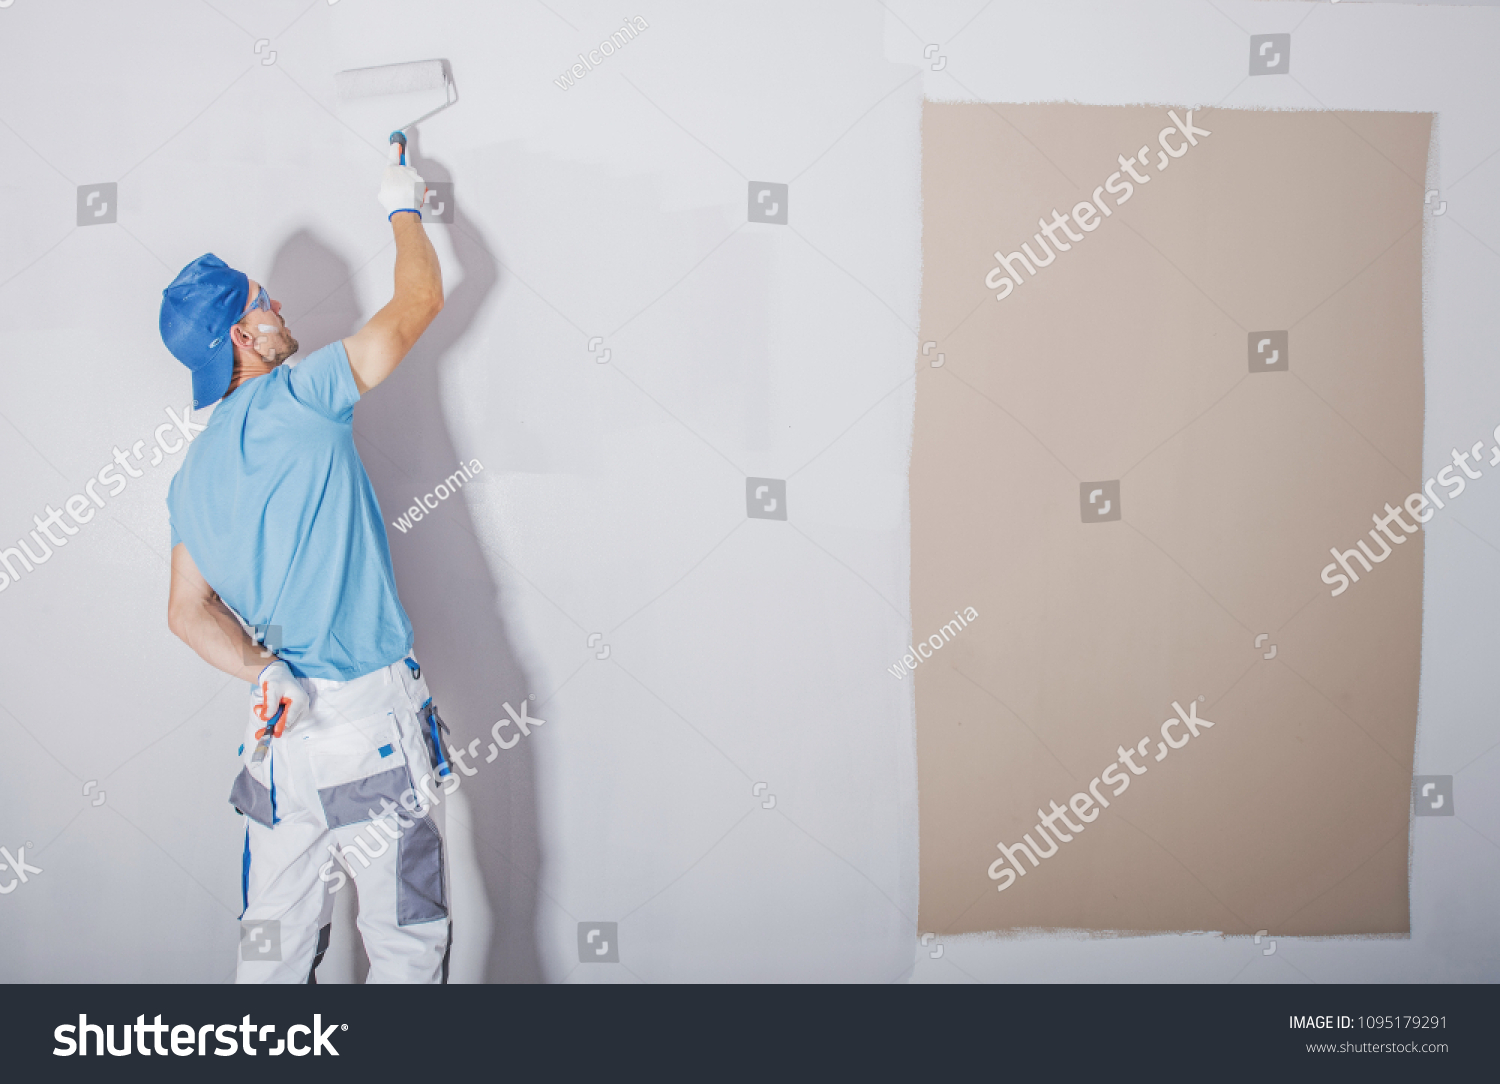 Room Painter at Work. Covering Darker Paint by Fresh and Lighter One. Apartment Renovation. Refreshing the Walls. Construction Theme. #1095179291